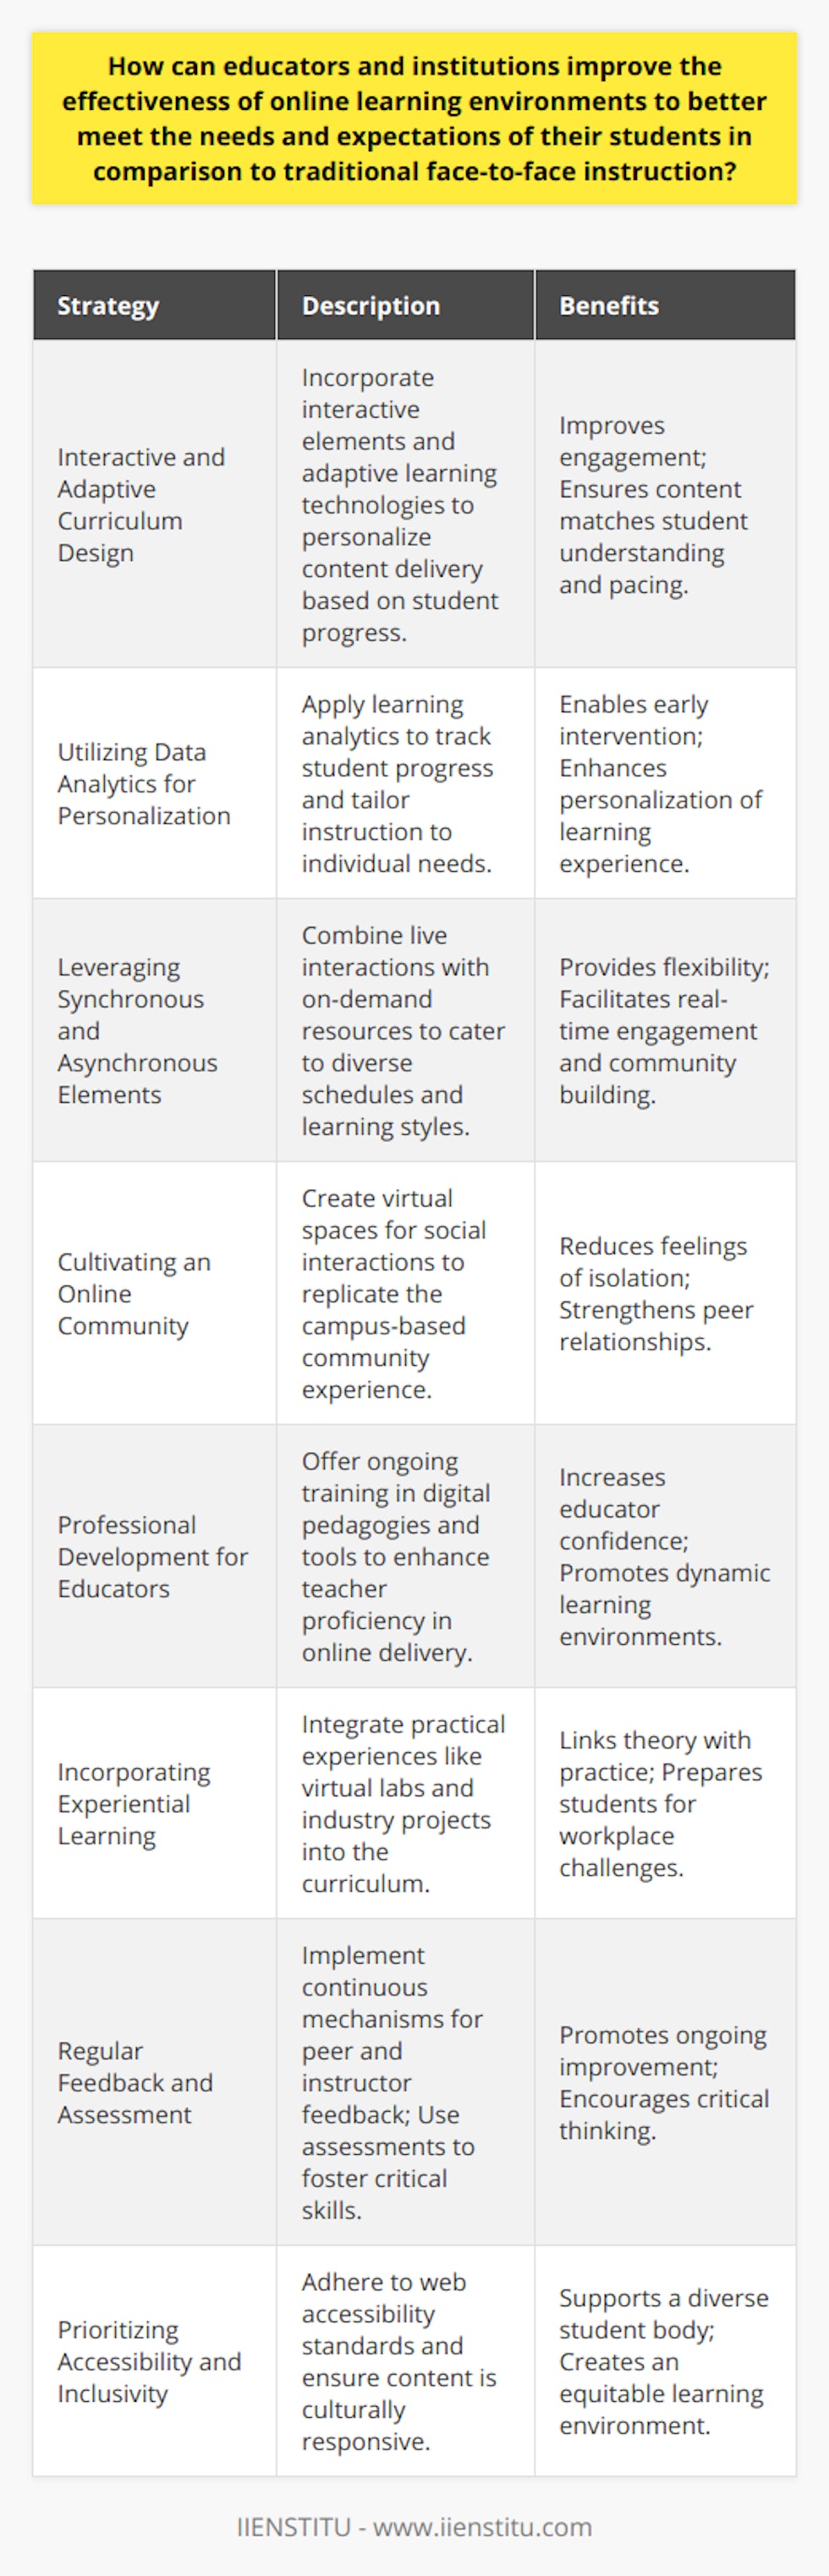 In the evolving landscape of education, the online learning environment is a critical space that requires attention to meet the needs and expectations of students who are accustomed to traditional face-to-face instruction. Below are strategies that educators and institutions can implement to elevate the online learning experience.**Interactive and Adaptive Curriculum Design**The design of the curriculum plays a vital role in engaging students. This means incorporating interactive elements that can captivate learners and provide immediate feedback. Adaptive learning technologies can adjust the content based on the learner's progress, ensuring that students receive content that is suitable for their level of understanding and pace.**Utilizing Data Analytics for Personalization**Educational institutions can employ learning analytics to gain insights into student interactions with online content. By closely monitoring progress and engagement levels, educators can personalize instruction, identify students who might be struggling, and provide specific interventions to support their learning journey.**Leveraging Synchronous and Asynchronous Elements**A balanced mix of synchronous (live) and asynchronous (on-demand) content delivery allows students to benefit from direct interaction with instructors and peers while also giving them the flexibility to learn at their own pace. Key is finding the right blend that accommodates various time zones and personal schedules without compromising the sense of community and the immediacy that comes with real-time discussions.**Cultivating an Online Community**Building a sense of community is crucial for online learners who may feel isolated from their peers. This can be achieved through virtual clubs, study groups, and social events that mimic the extracurricular aspects of campus life. Success in this area requires active facilitation to encourage participation and foster relationships among students.**Professional Development for Educators**Educators themselves must be skilled in delivering content online. Regular training and professional development opportunities should be offered to empower teachers with the latest digital pedagogies and tools. When educators are confident in using technology, they can create more dynamic and effective online learning experiences.**Incorporating Experiential Learning**The application of knowledge can be facilitated by integrating real-world projects and simulations into the curriculum. Providing practical experience through virtual labs, case studies, and industry partnerships can make learning more relevant and equip students with skills that are directly transferable to the workplace.**Regular Feedback and Assessment**Continuous feedback is integral to student success. Online learning environments should have mechanisms for both peers and educators to offer constructive feedback. Likewise, assessments should not only evaluate student knowledge but also promote critical thinking and creativity.**Prioritizing Accessibility and Inclusivity**Ensuring that online learning materials are accessible to all students, including those with disabilities, is a fundamental requirement. This includes following web accessibility standards and providing necessary accommodations. Likewise, content should be culturally responsive and inclusive, reflecting a diversity of perspectives.By focusing on these areas—adaptive curriculum design, personalized learning through data analytics, leveraging synchronous and asynchronous delivery, cultivating online communities, investing in educator professional development, incorporating experiential learning, regular feedback and assessment, and prioritizing accessibility and inclusivity—educators and institutions can enhance the online learning environment to better align with the expectations of students accustomed to in-person instruction. Adopting these strategies can lead to a more engaging, effective, and equitable online educational system that serves the needs of a diverse student body.